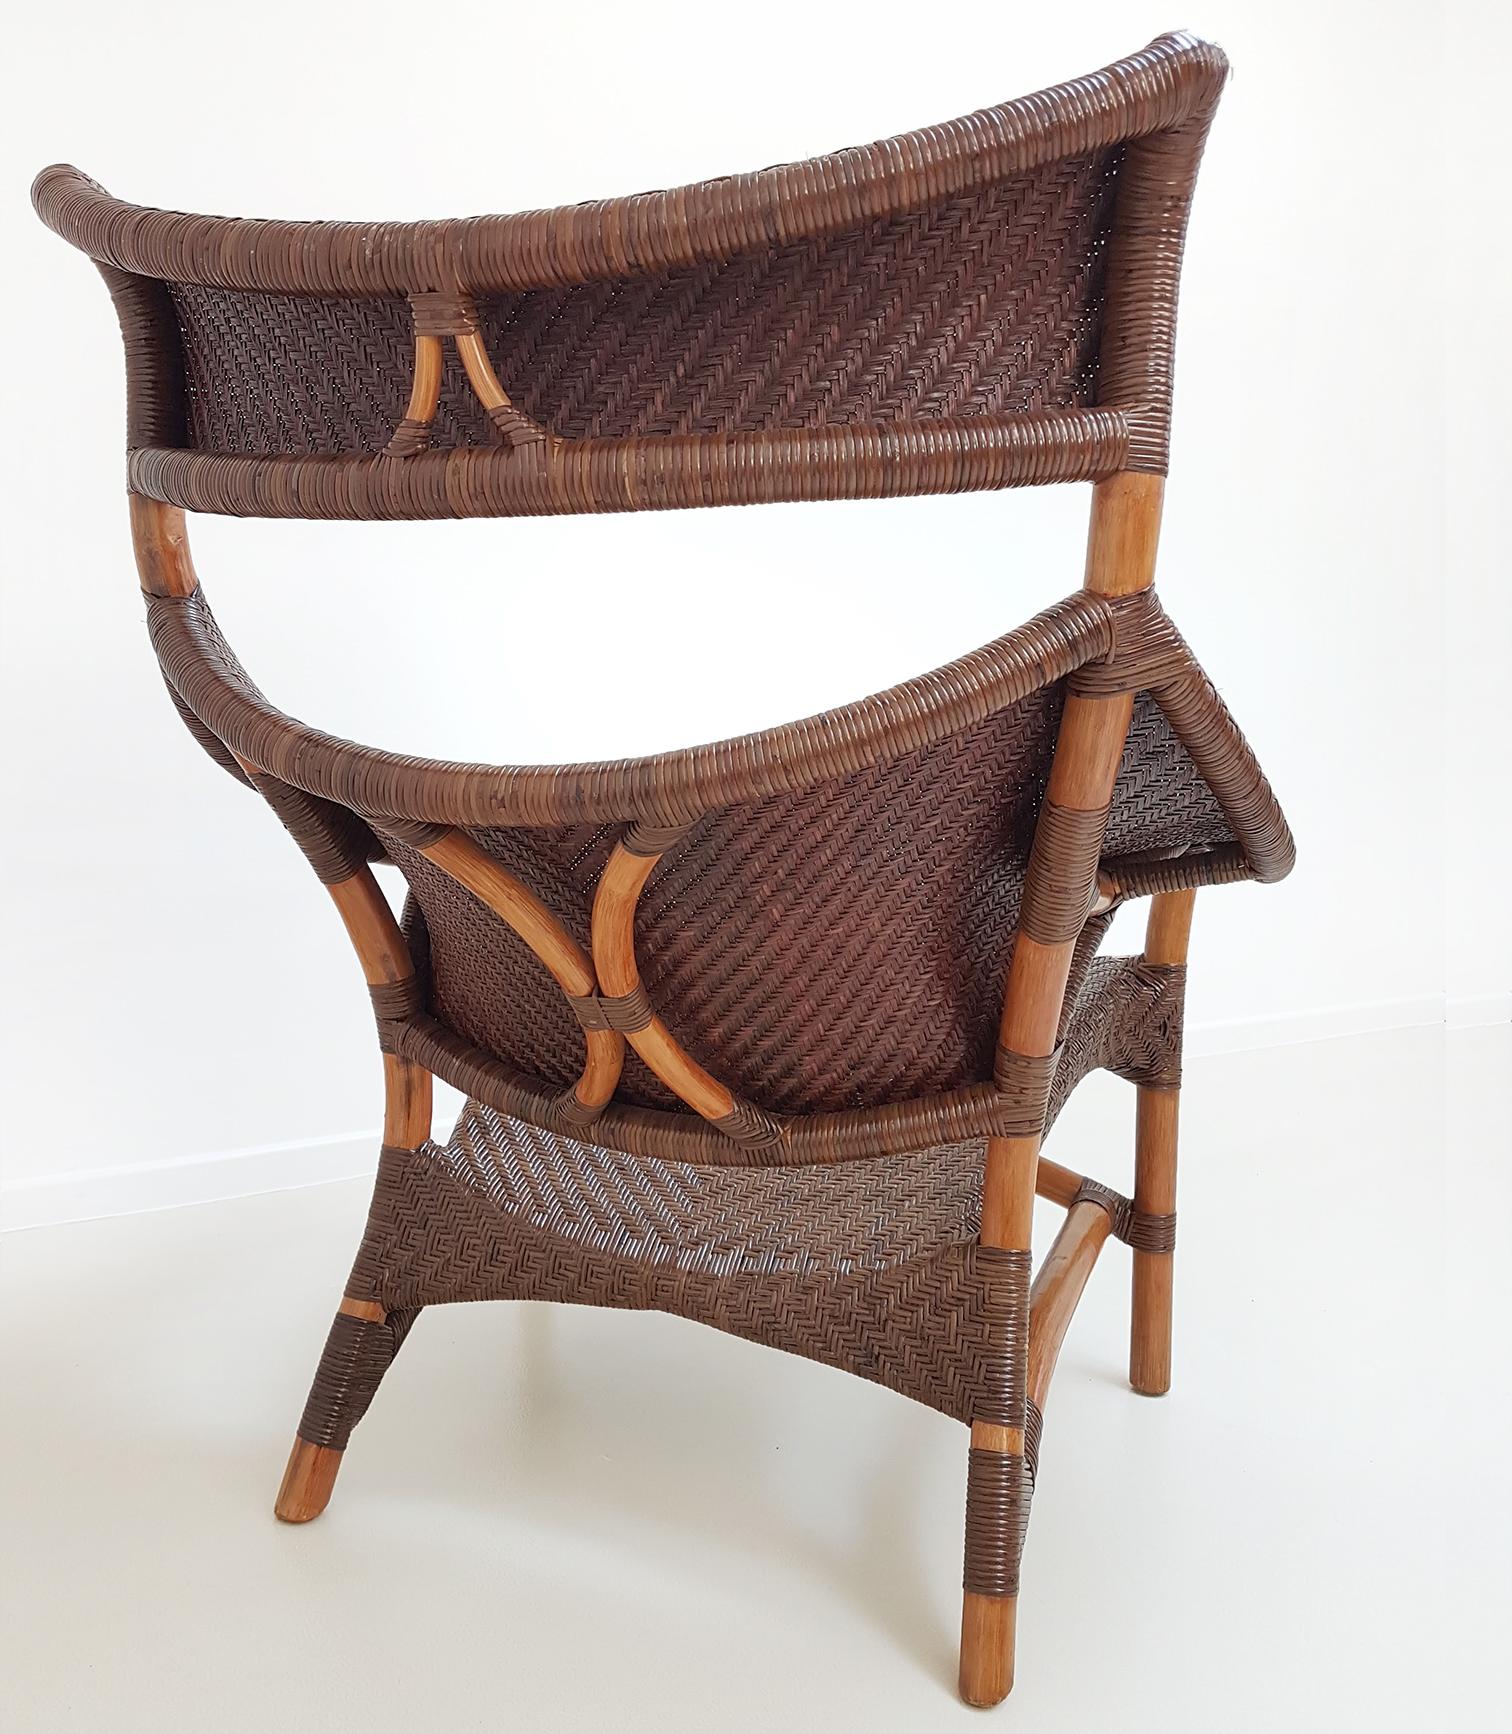 Late 19th Century Rattan Chair and Foot Rest by Yuzru Yamakawa, Japan, 1980